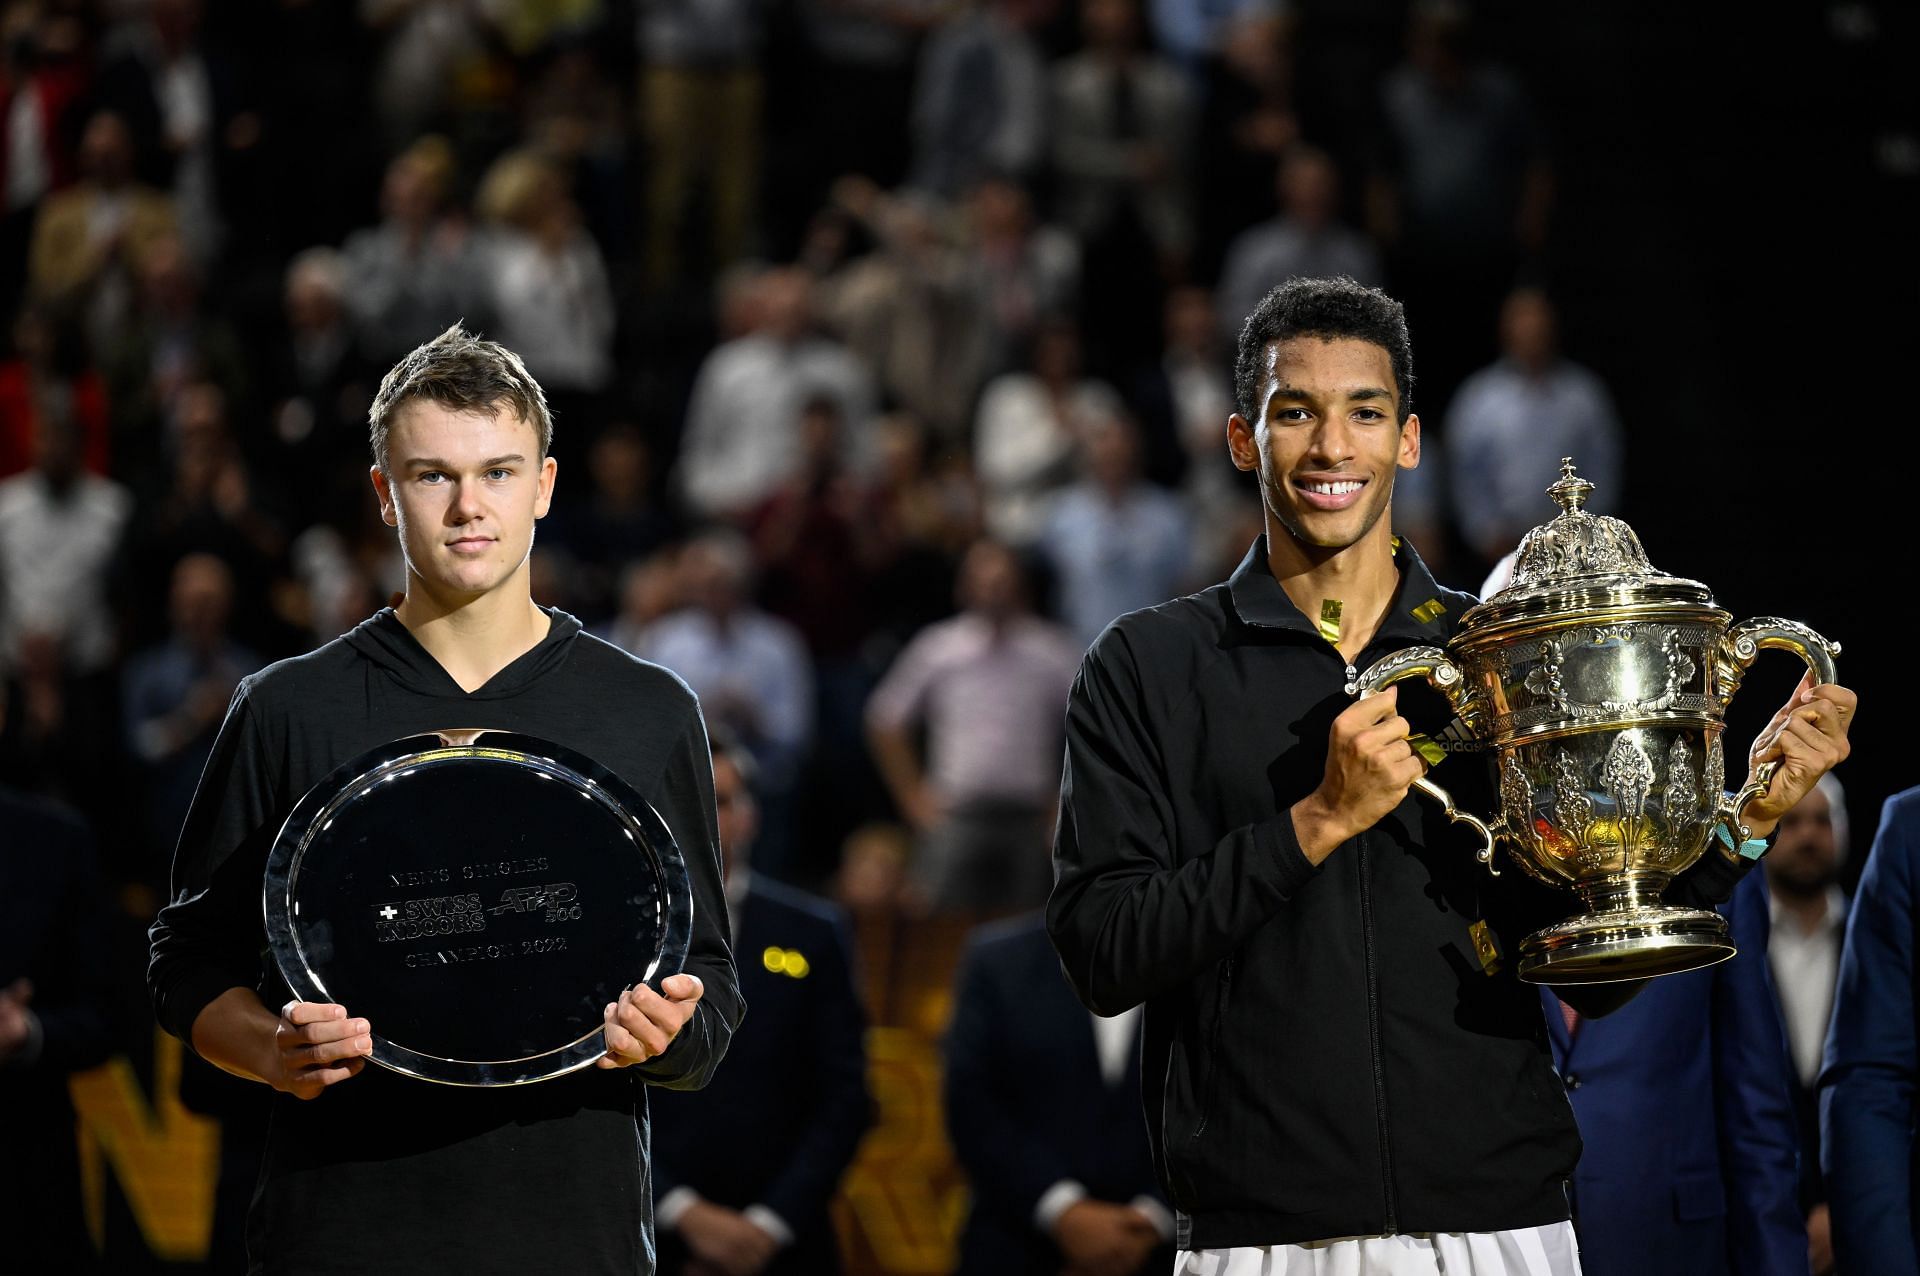 Felix Auger-Aliassime will take on Holger Rune in the semifinals